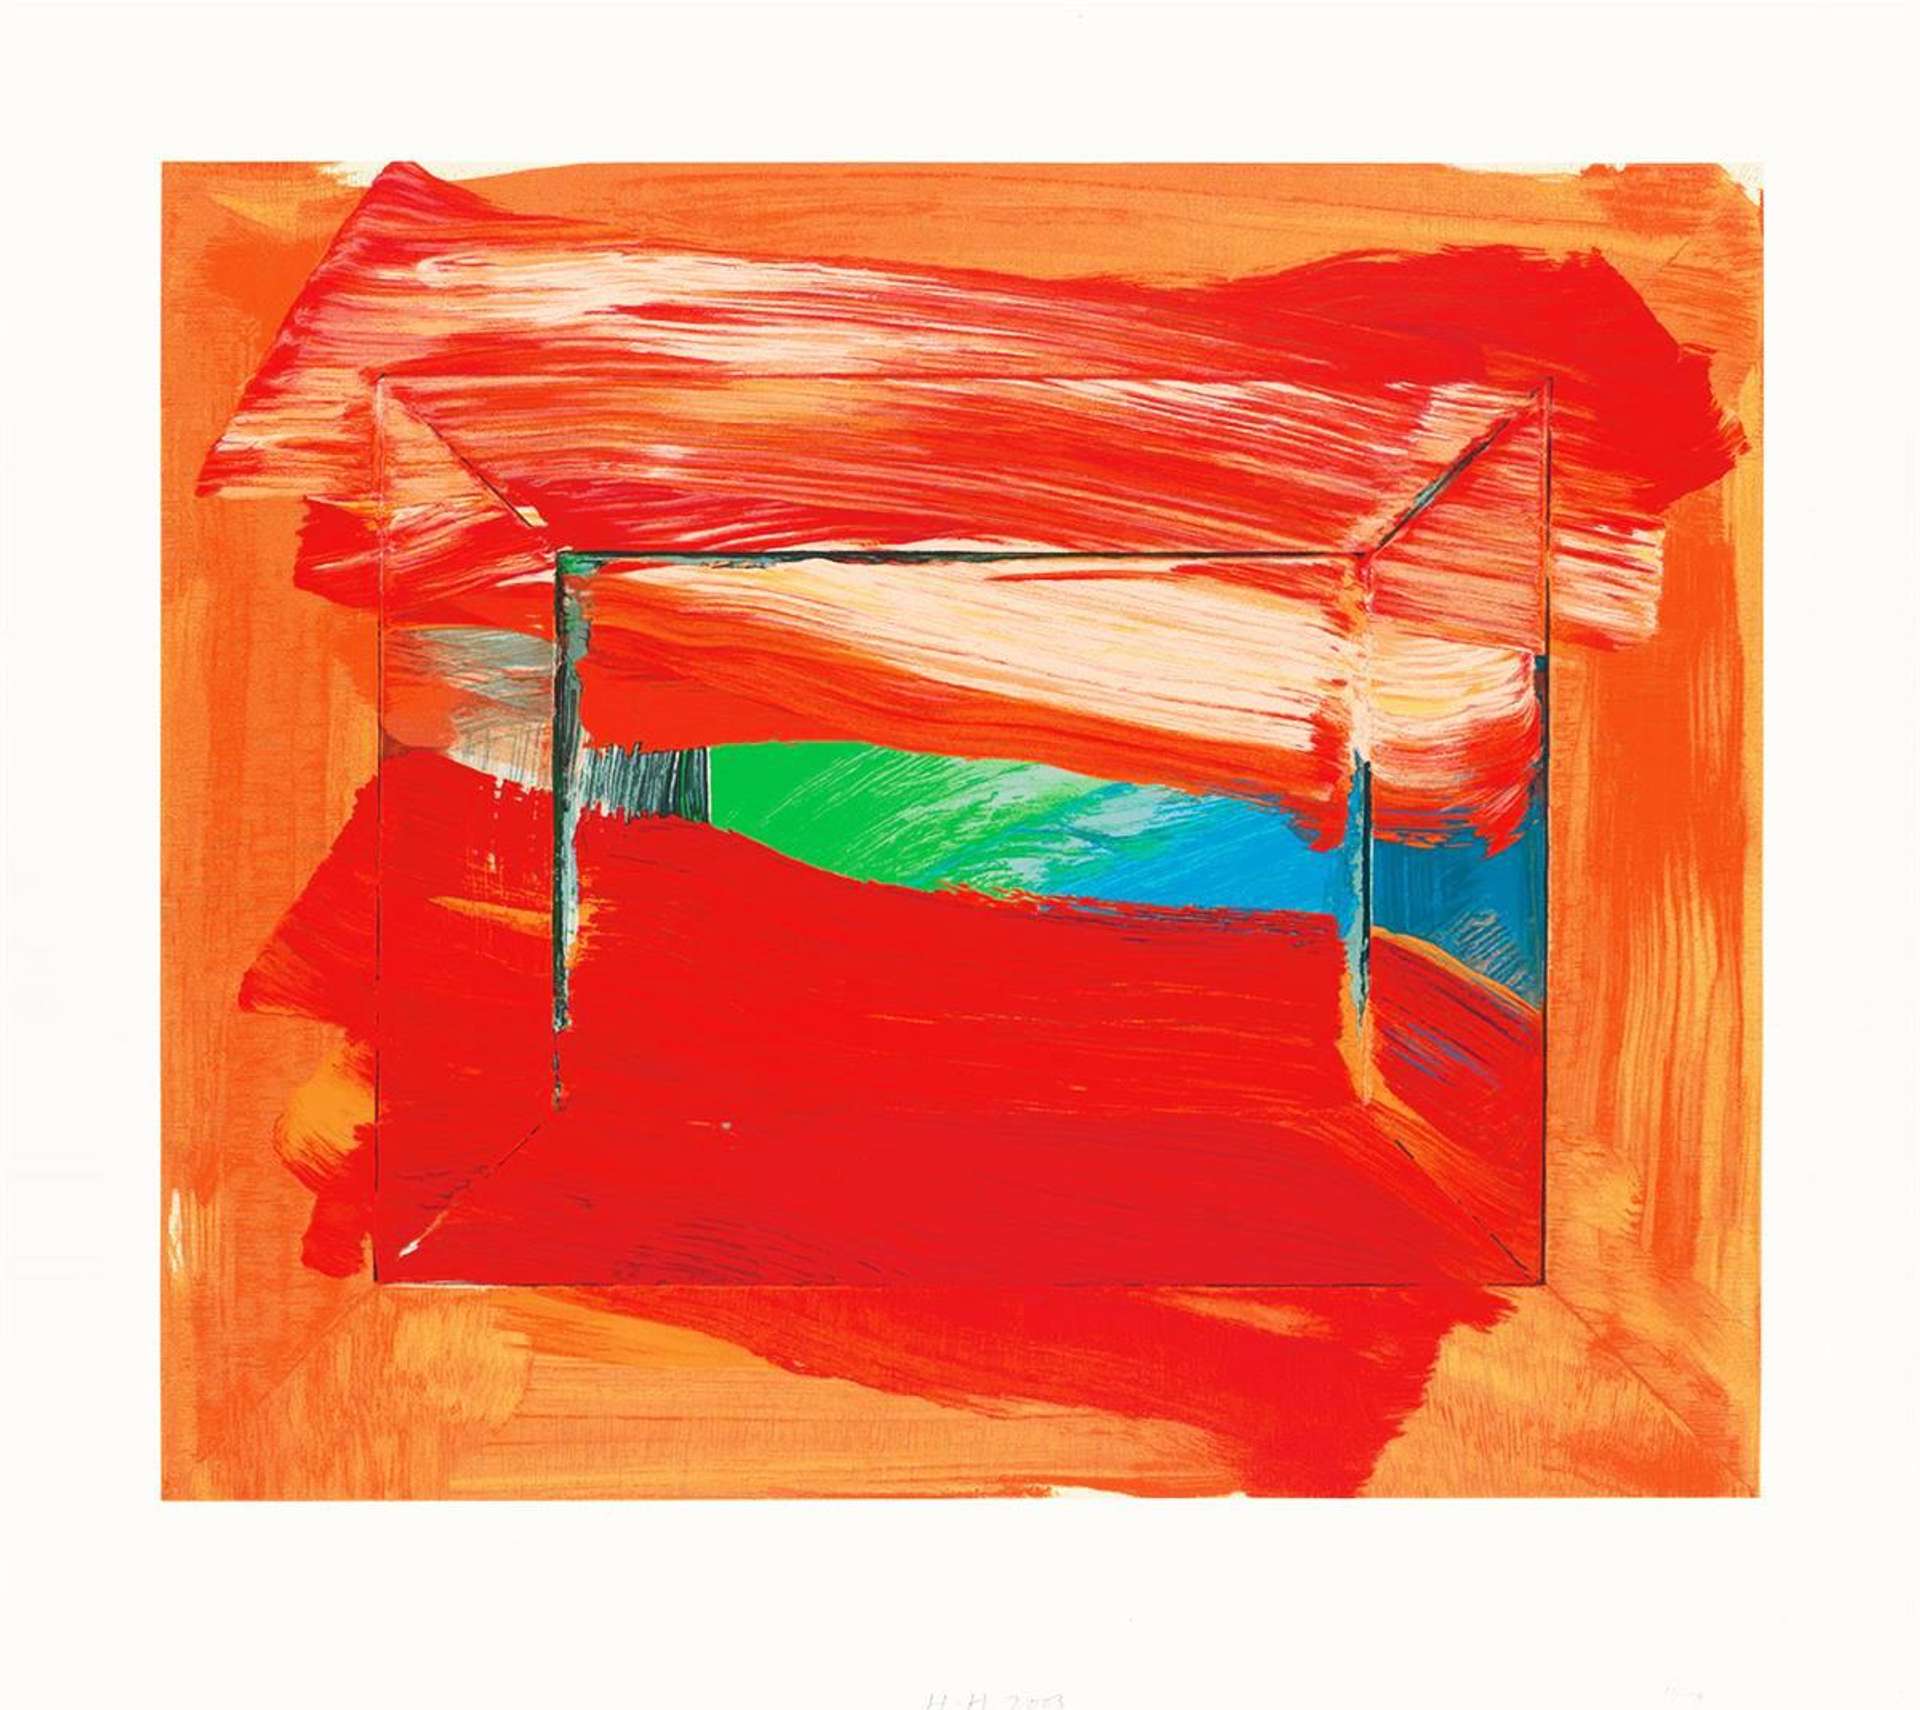 Howard Hodgkin Value: Top Prices Paid at Auction | MyArtBroker